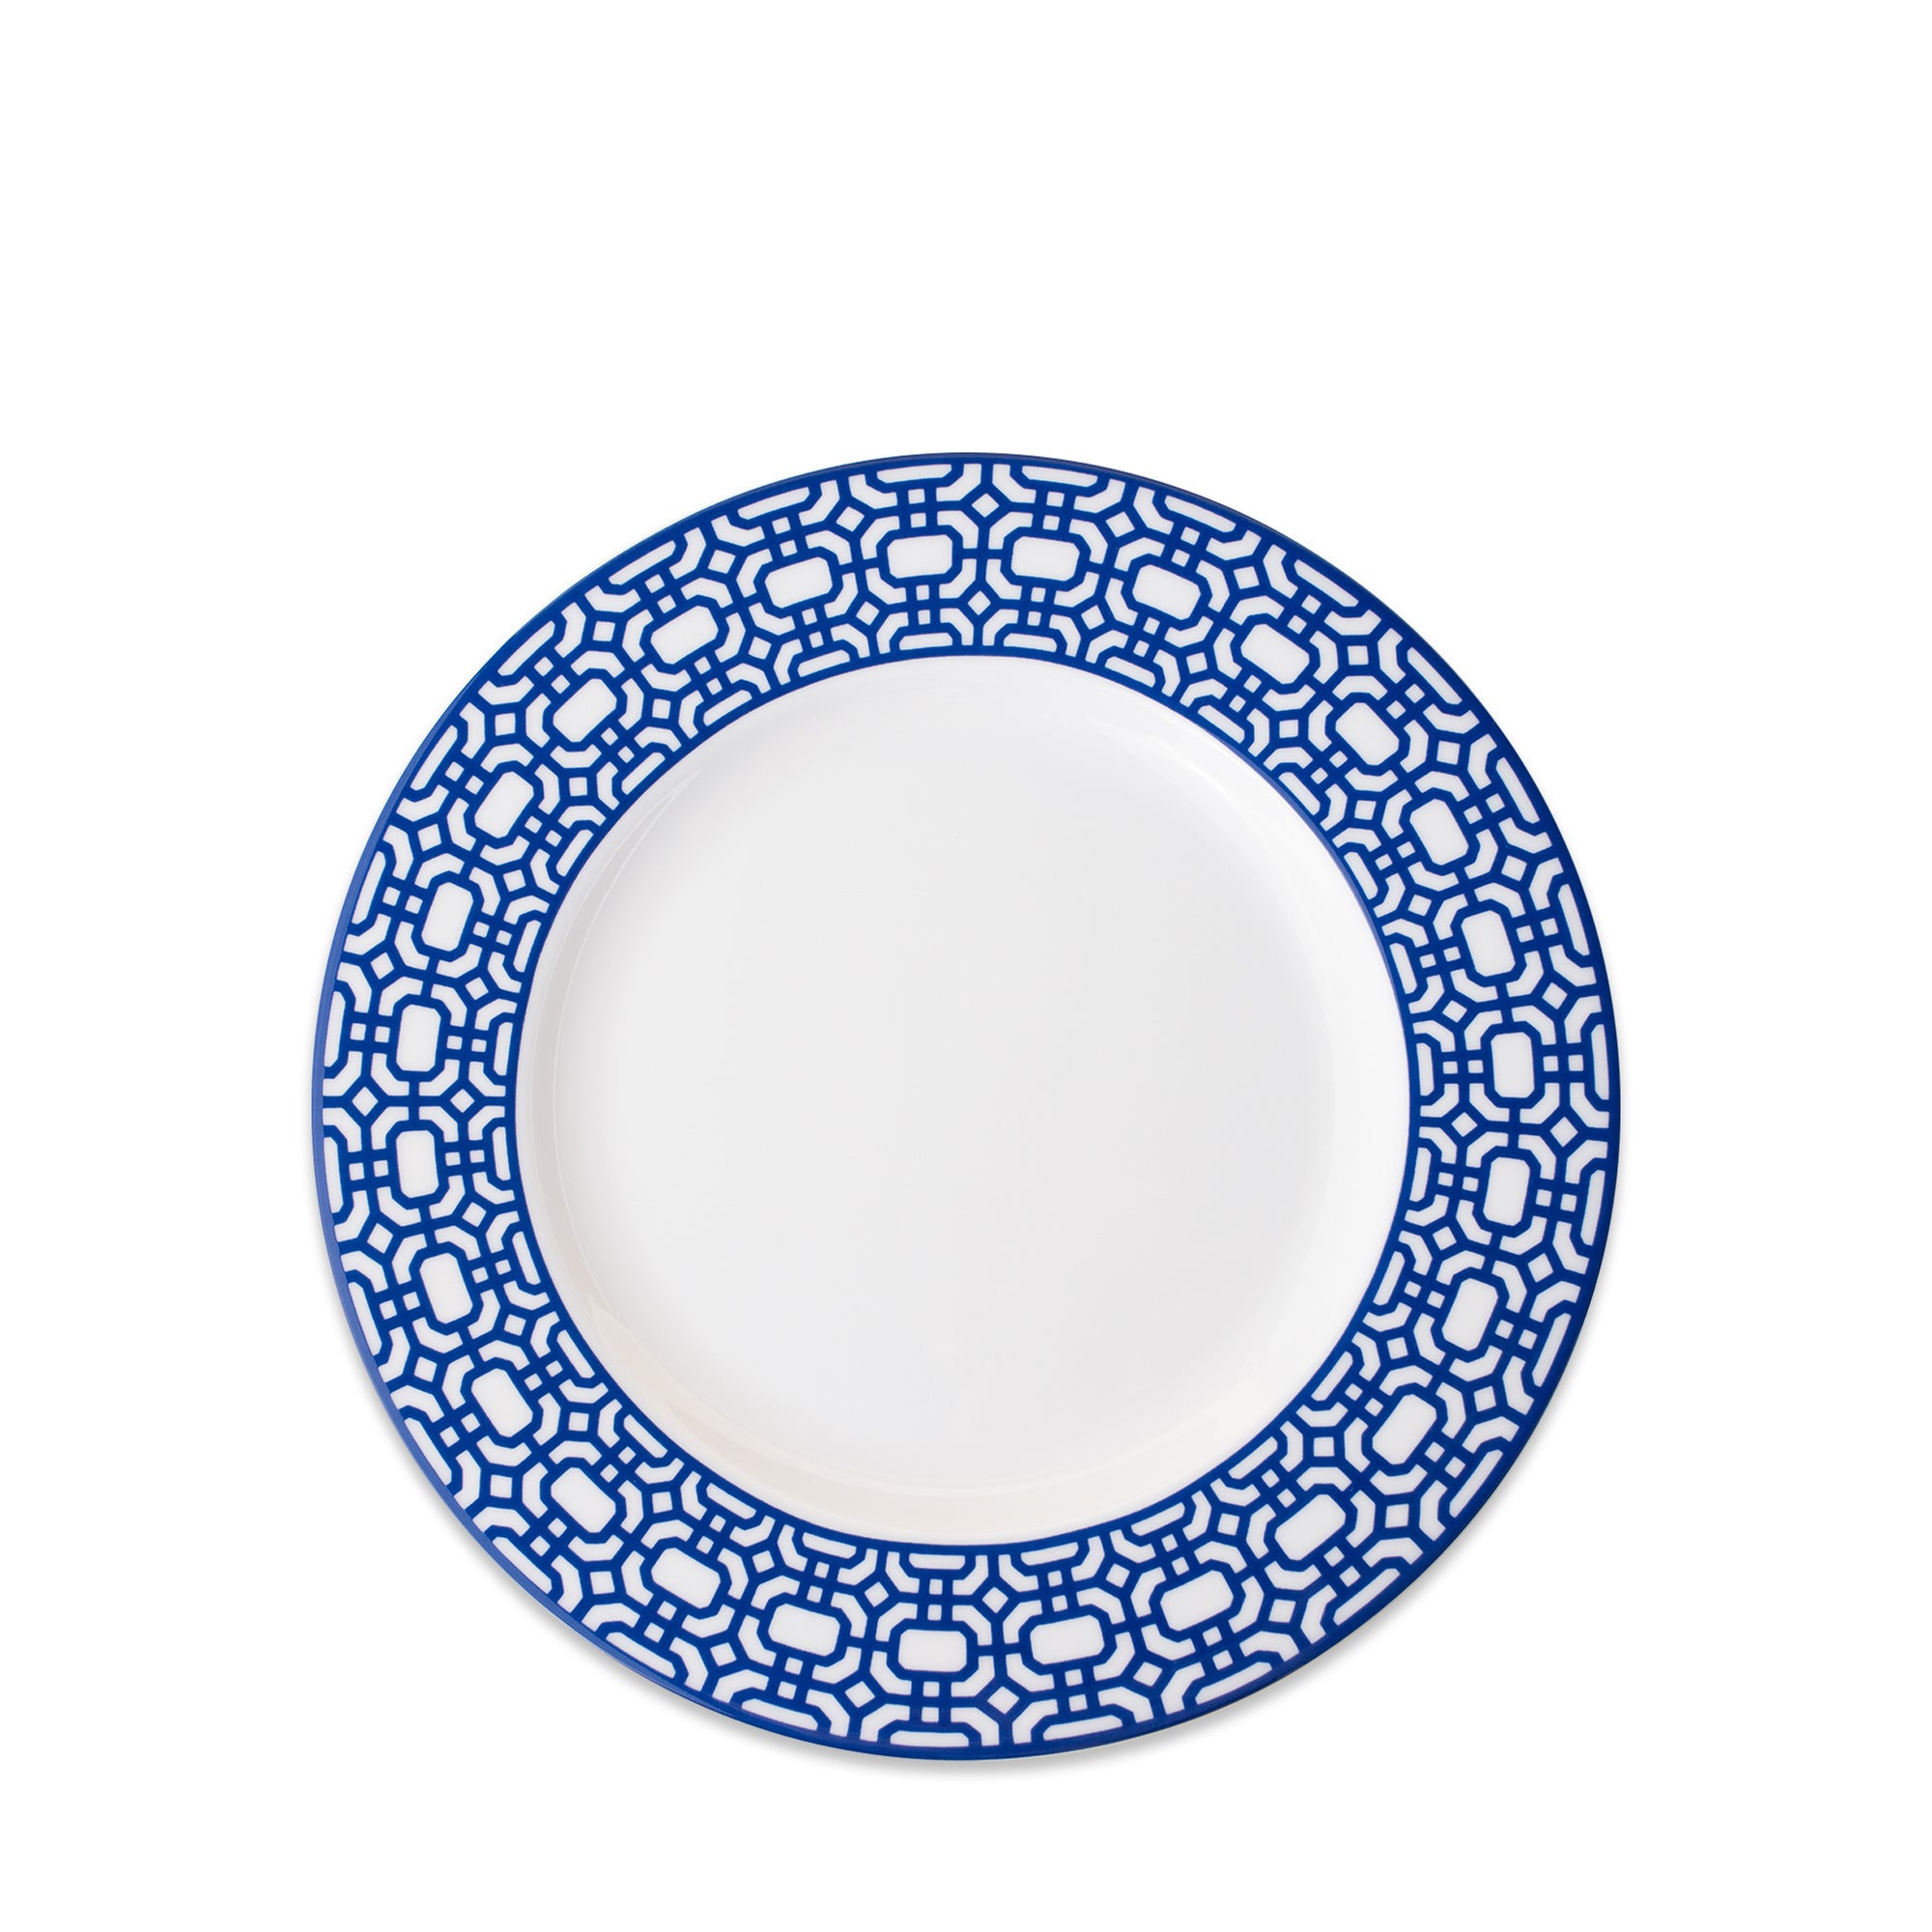 A Newport Garden Gate Rimmed Salad Plate with a blue geometric pattern around the rim, crafted from premium porcelain by Caskata Artisanal Home, perfect for adding a touch of elegance to any table setting.